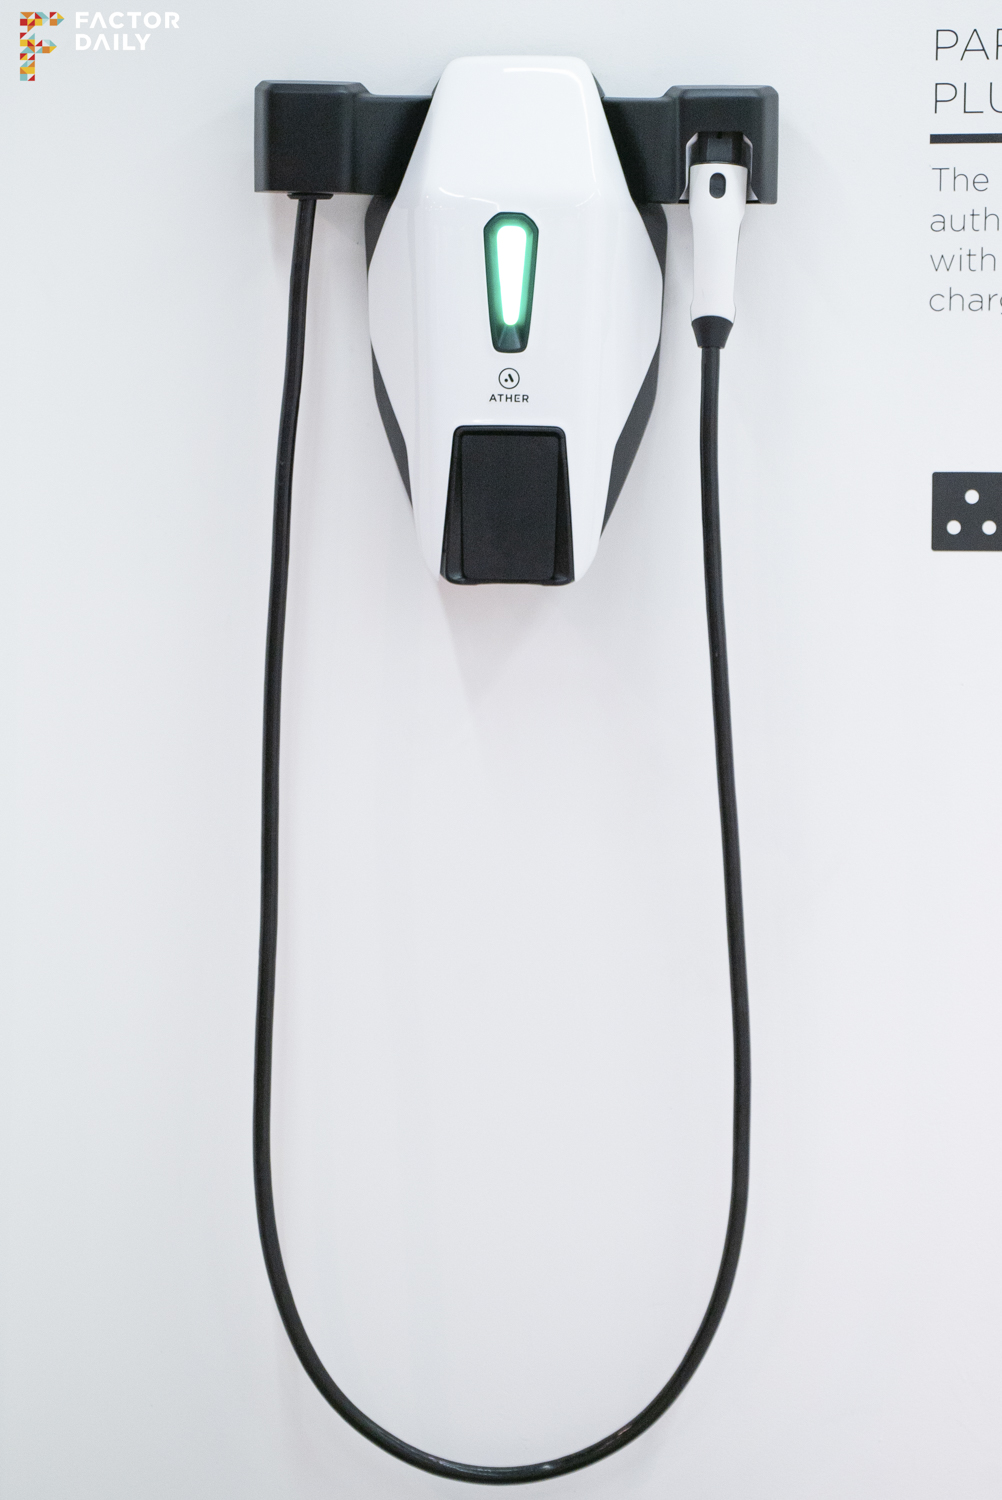 Ather's charging pod 